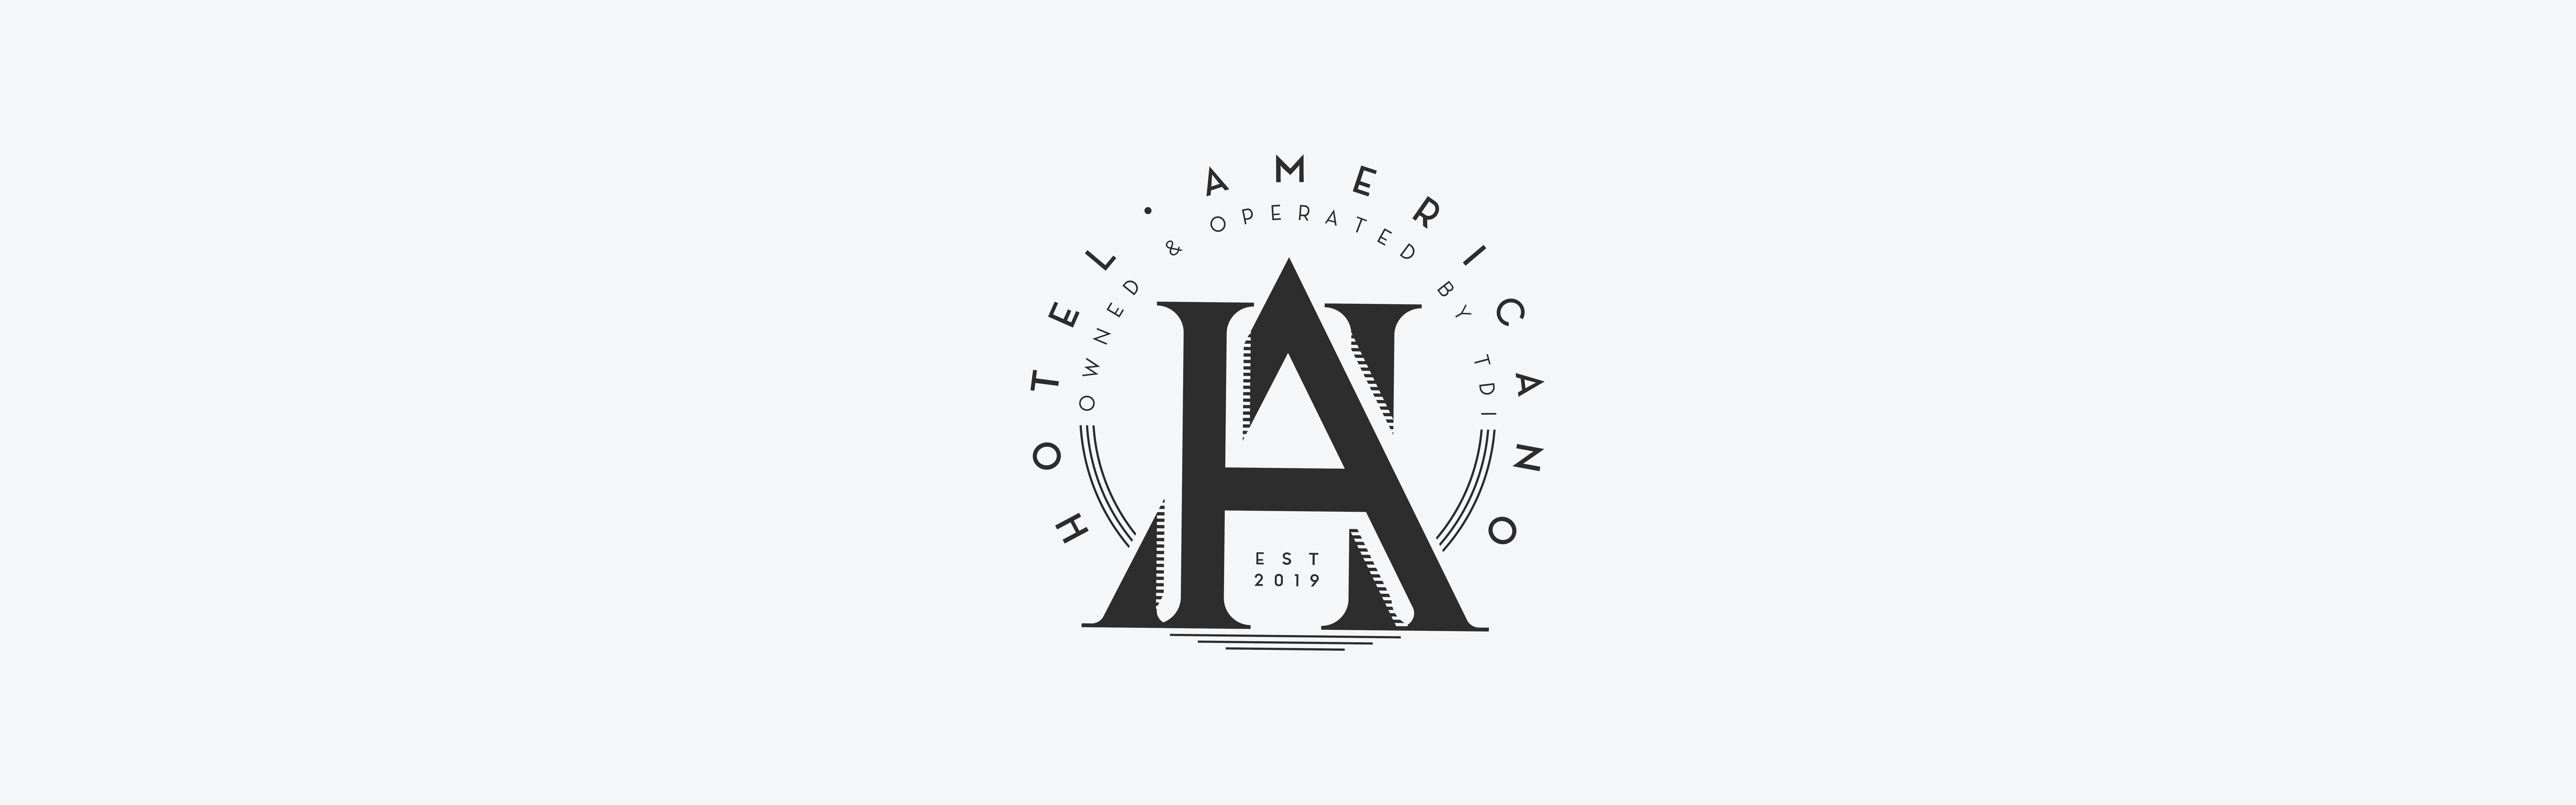 Black and white graphic of a stylized letter "a" with text arranged in a circular formation around it, suggesting the Hotel Americano logo or emblem design.